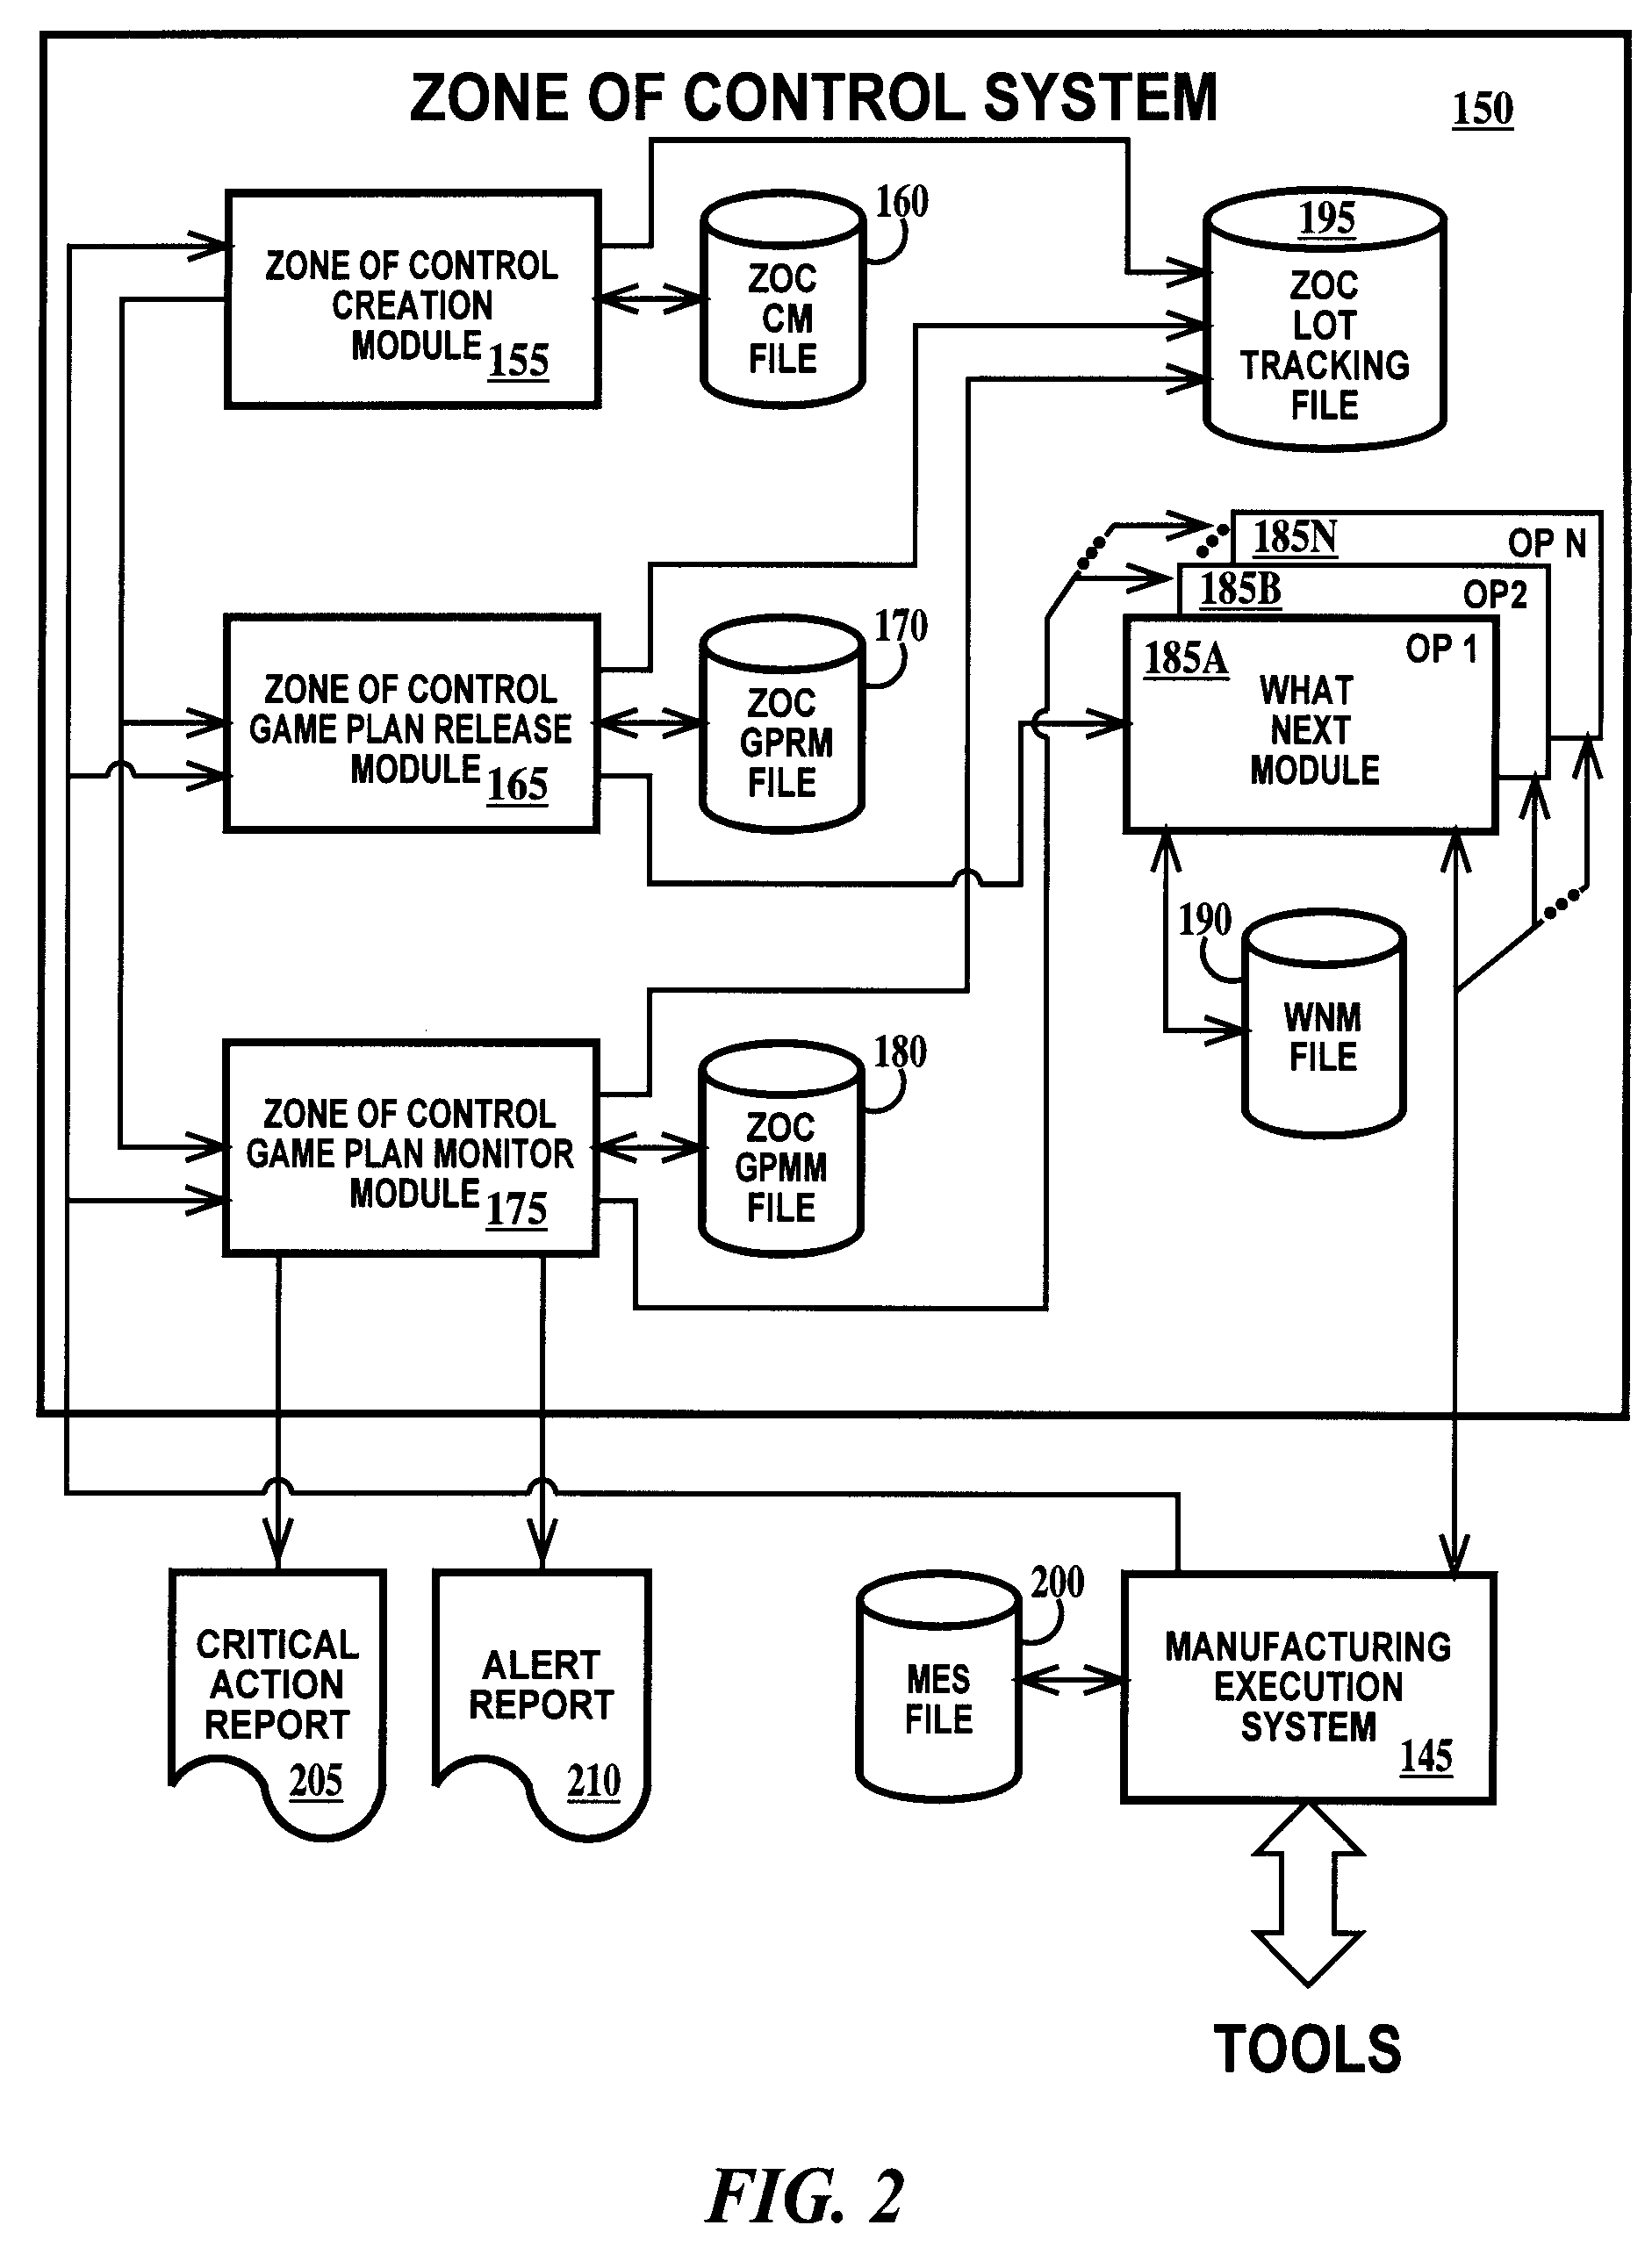 Method of release and product flow management for a manufacturing facility